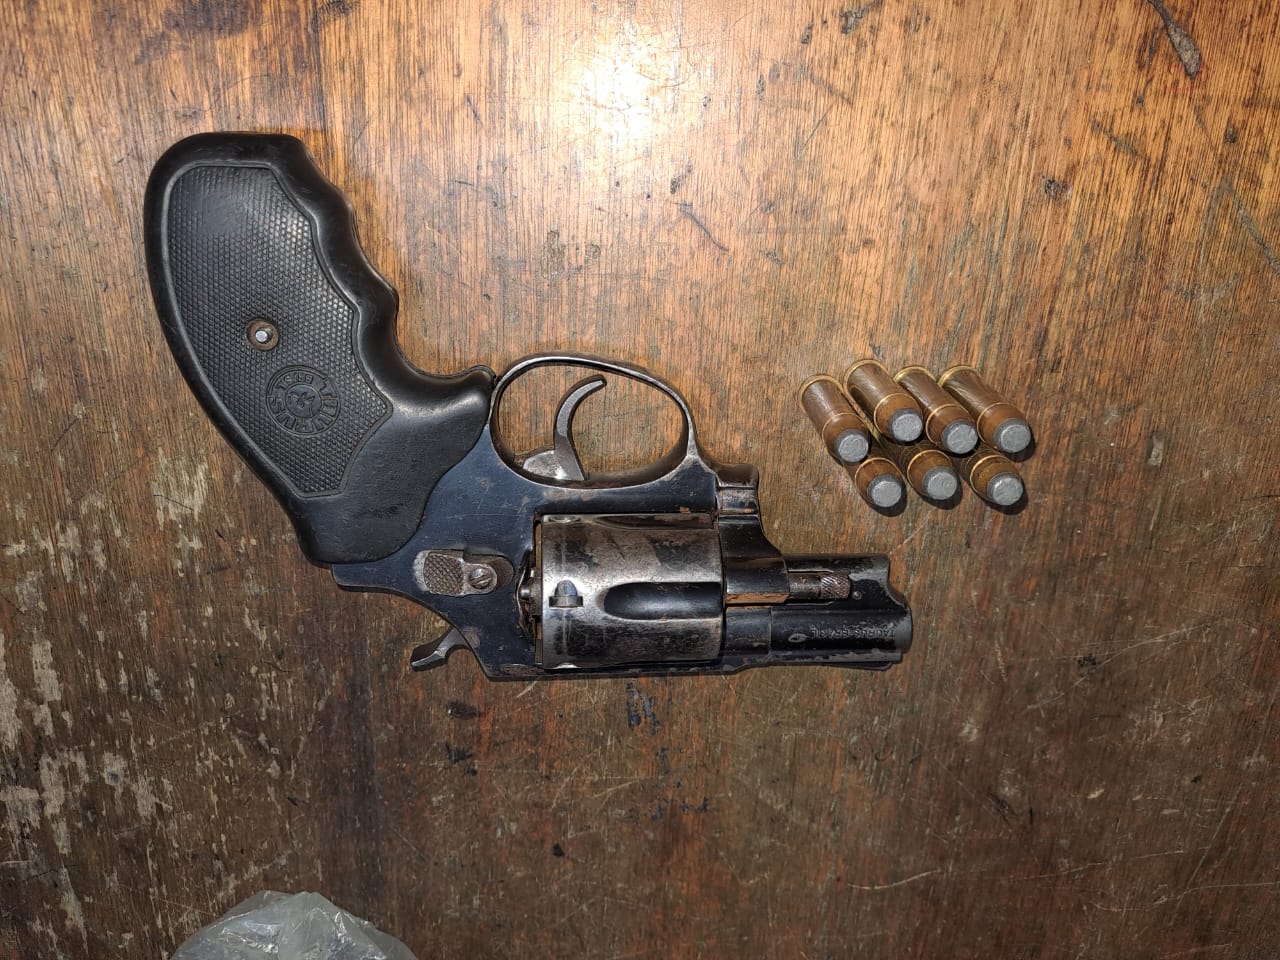 Three suspects arrested for unlawful possession of firearms